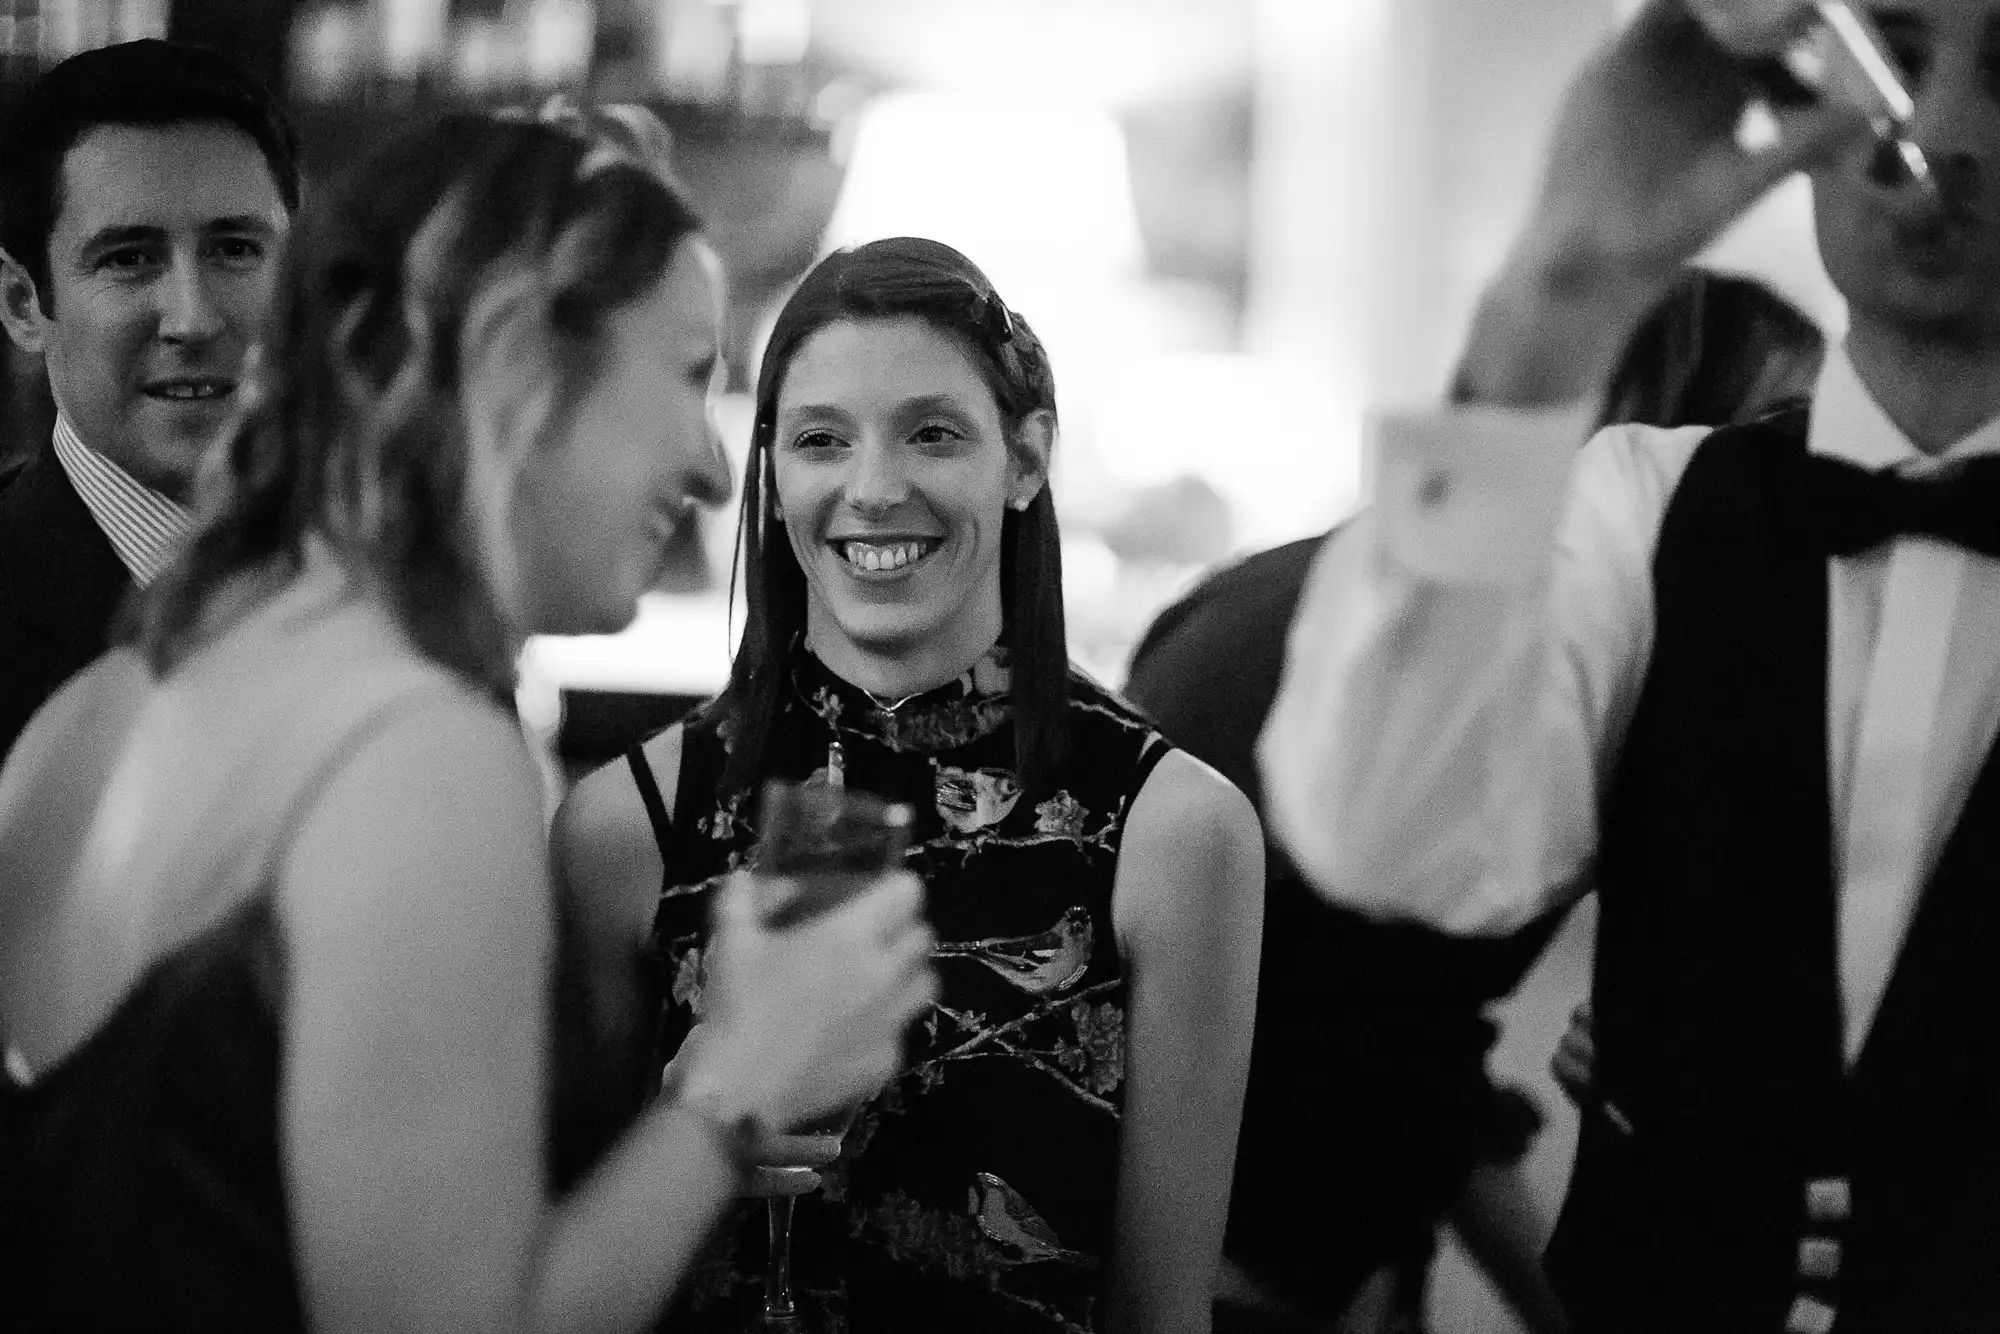 A woman with a ponytail smiles while holding a drink at a lively event, surrounded by other guests chatting in a dimly lit room.